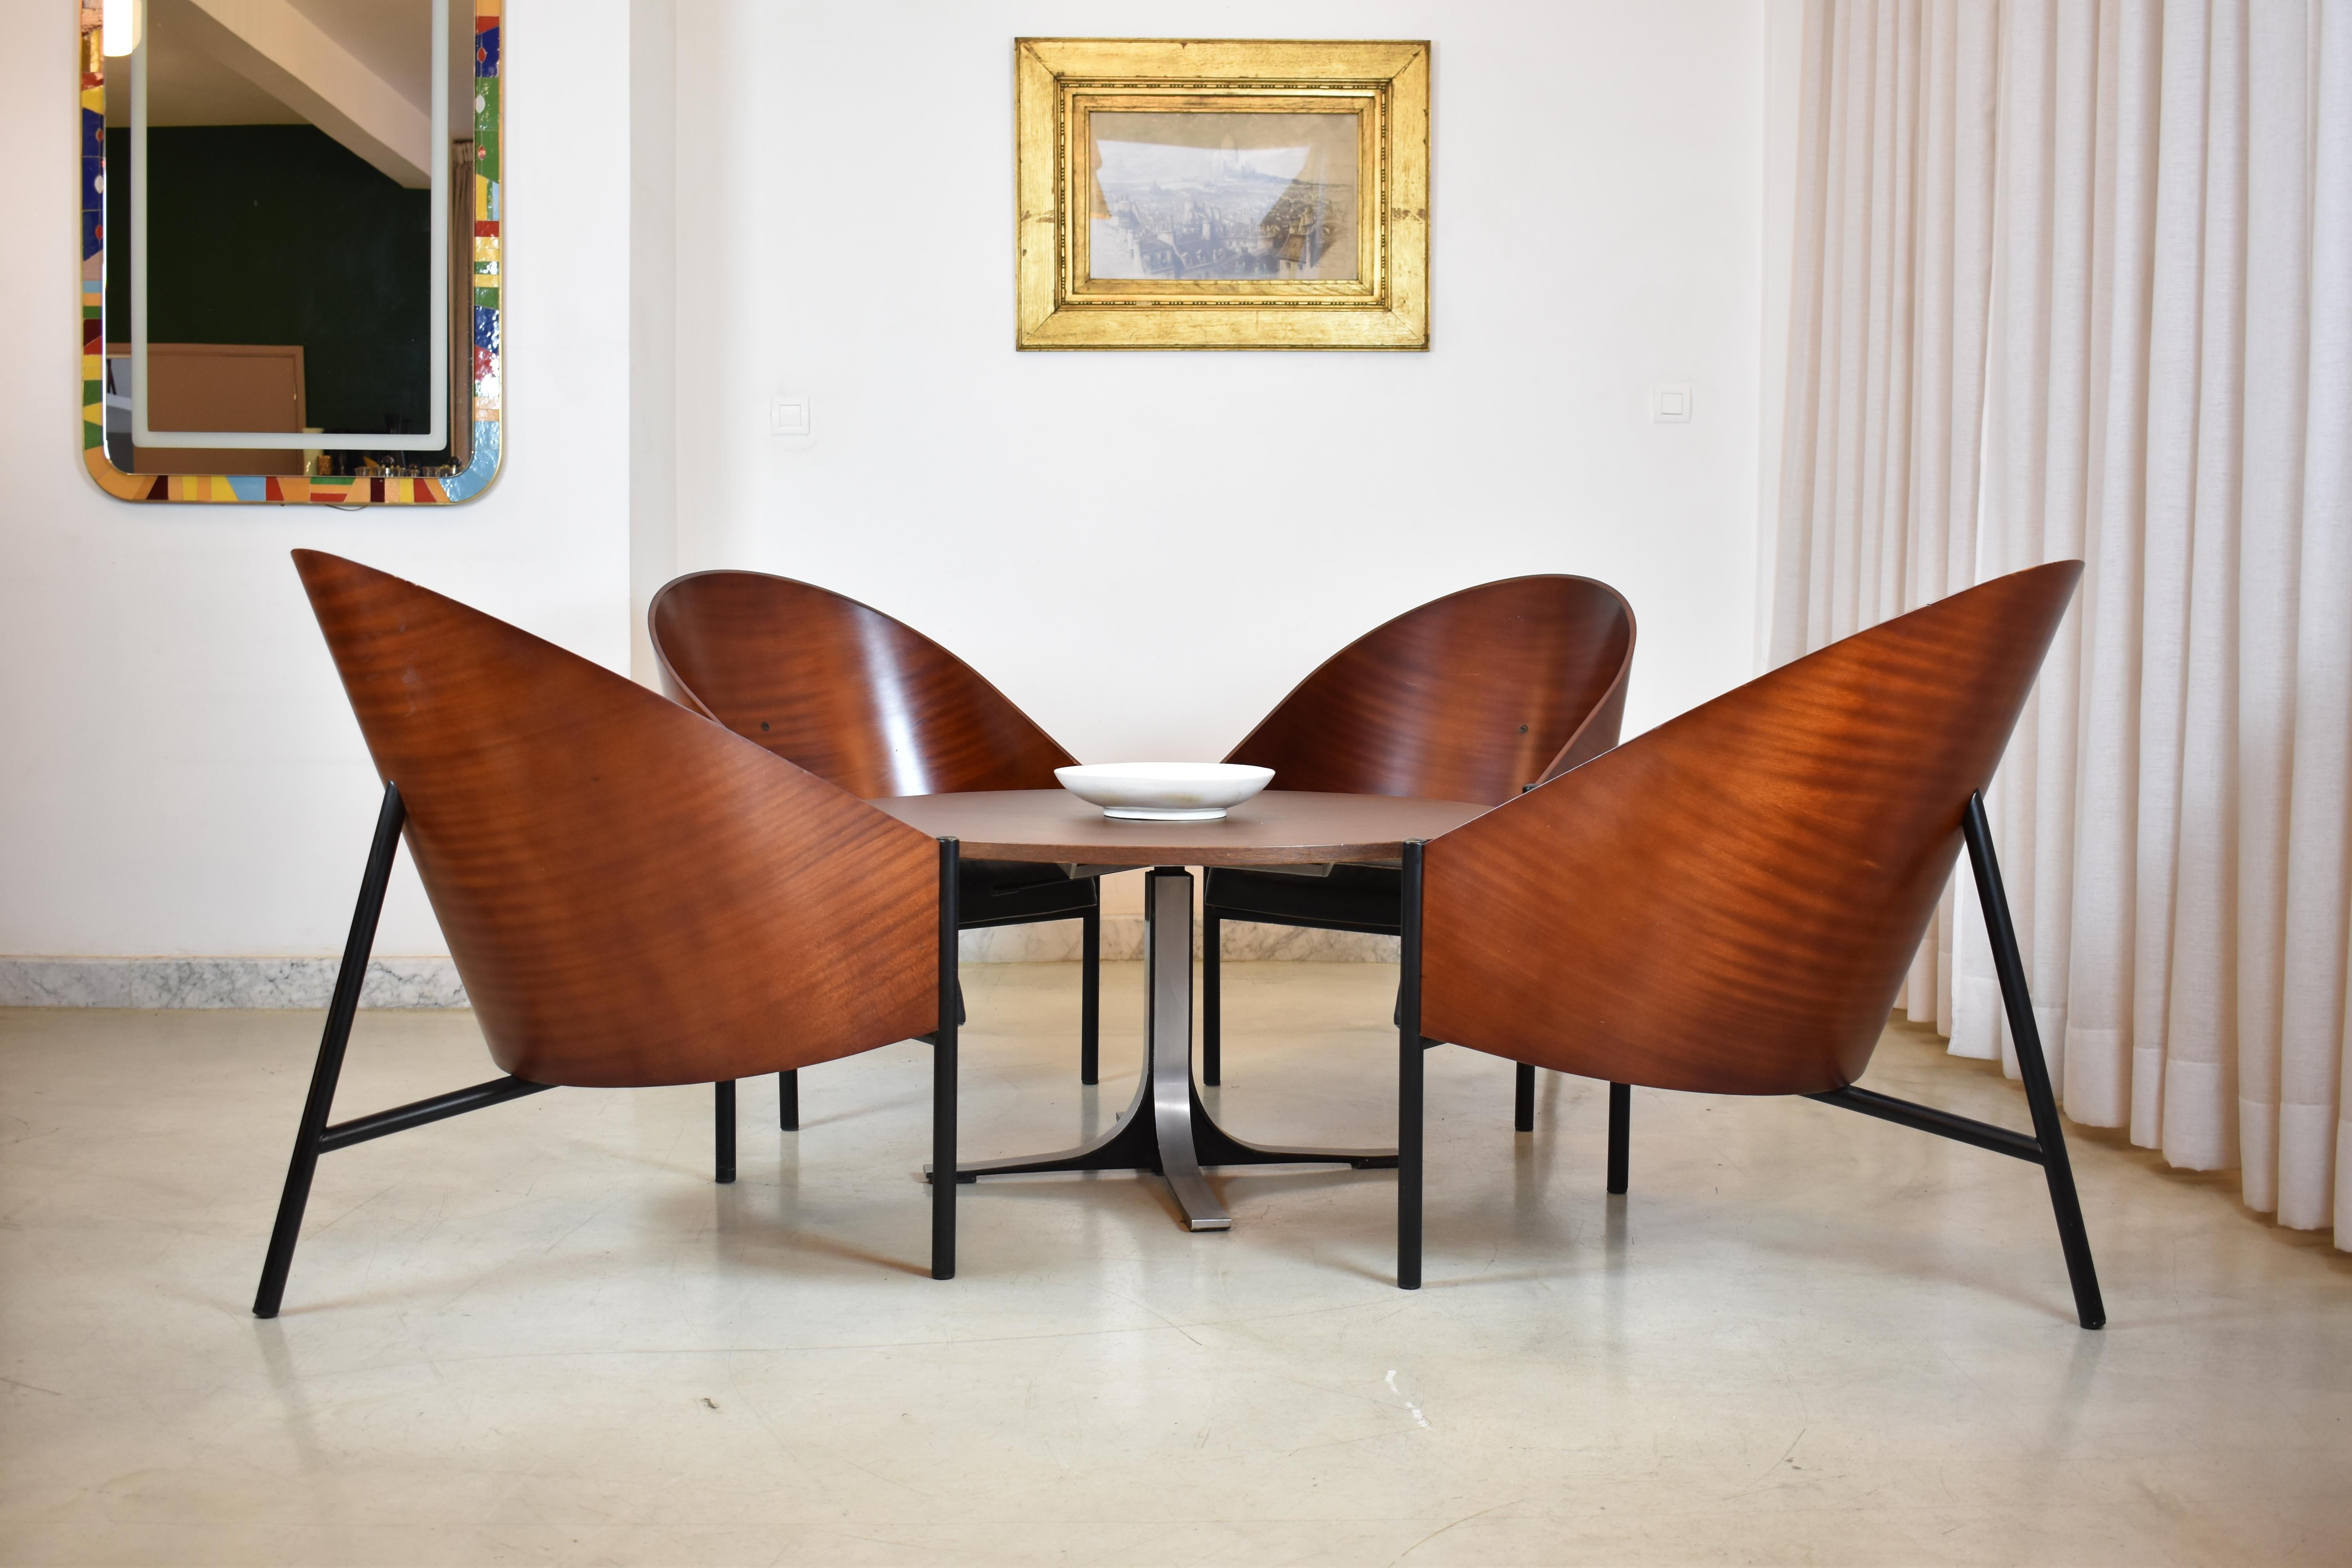 Post-Modern Set of Four Philippe Starck Armchairs, 1st Ed., Pratfall for Driade, Italy, 1984 For Sale